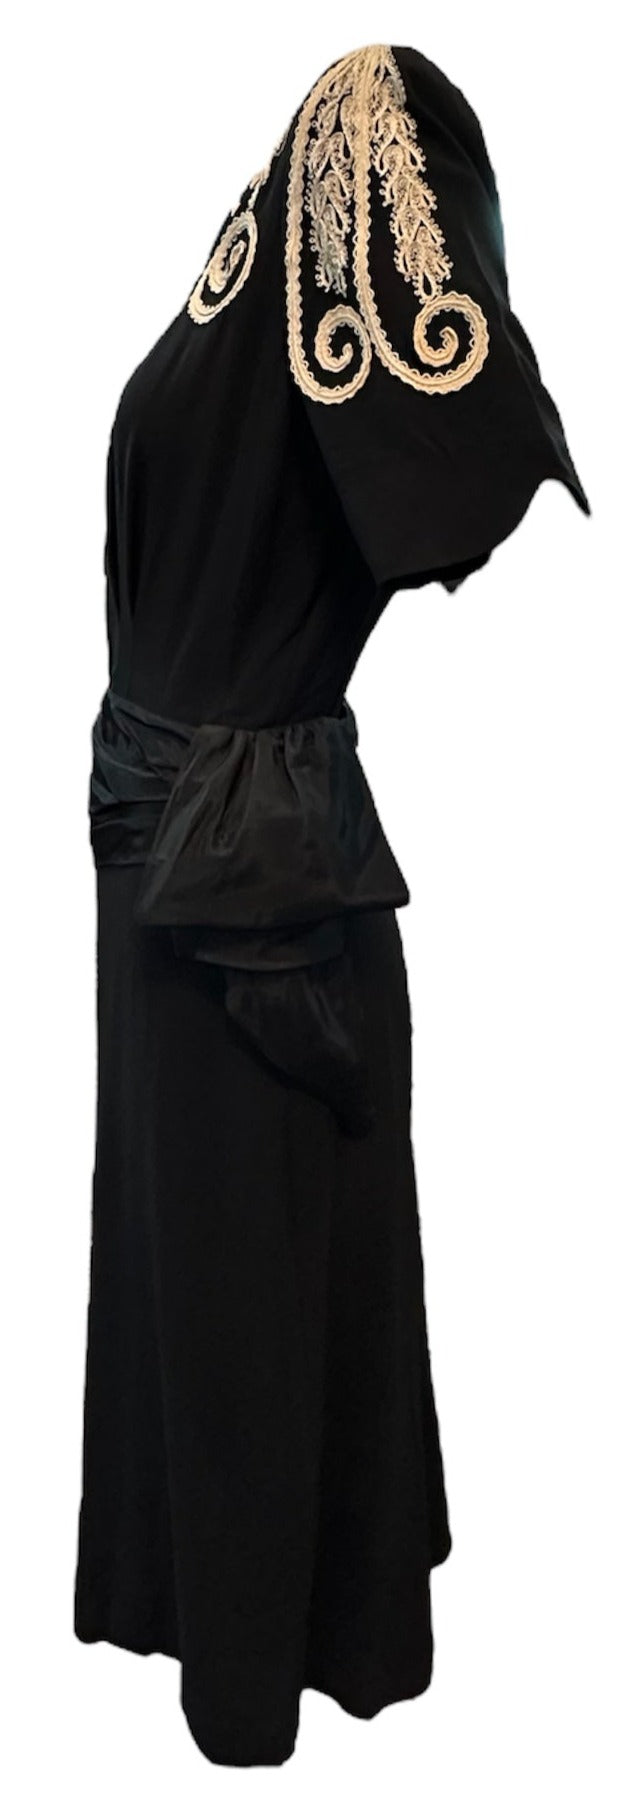 1940s Black Crepe Hollywood Noir Dress with Soutache Detail and Reversed Carved Lucite Button SIDE 2 of 5